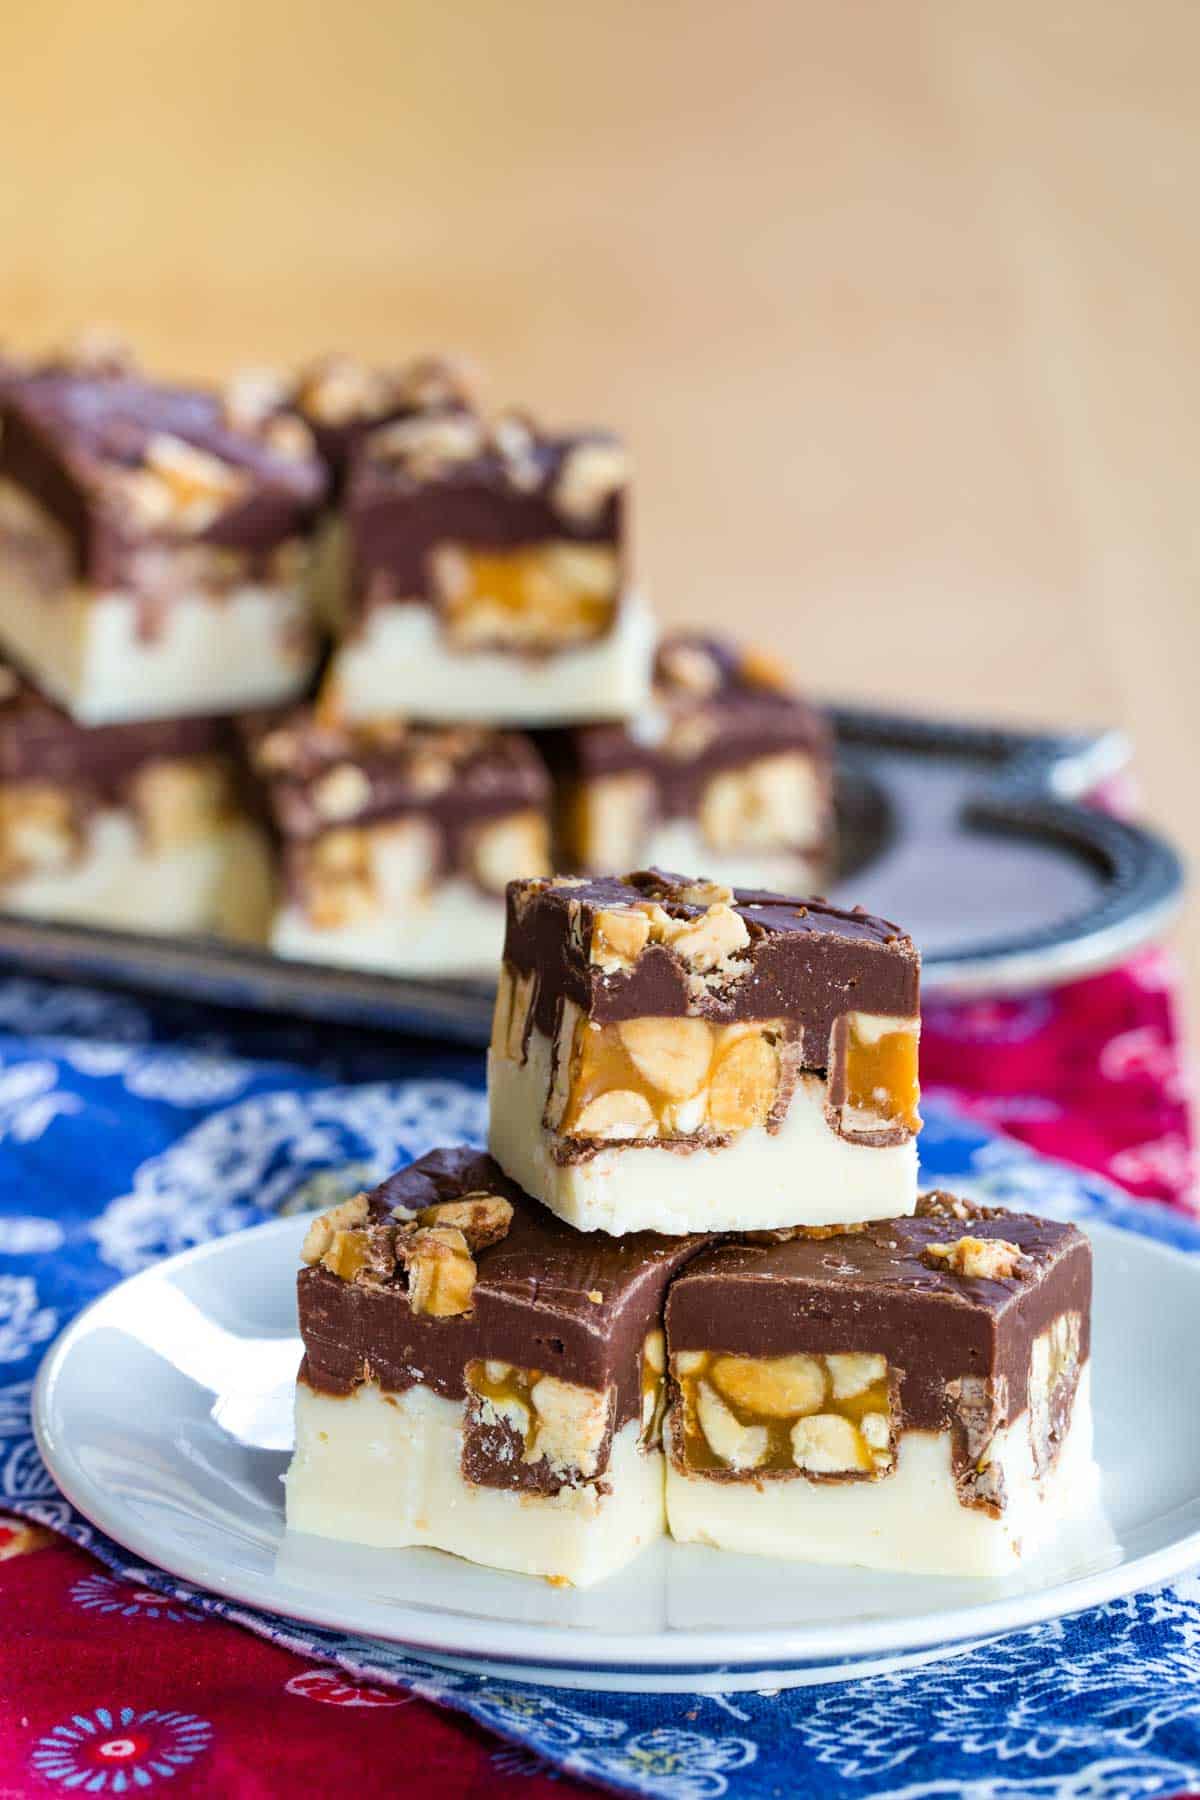 Small white plate with three squares of Double Chocolate Snickers Fudge on top of floral cloth napkins with a silver platter of more fudge in the background.